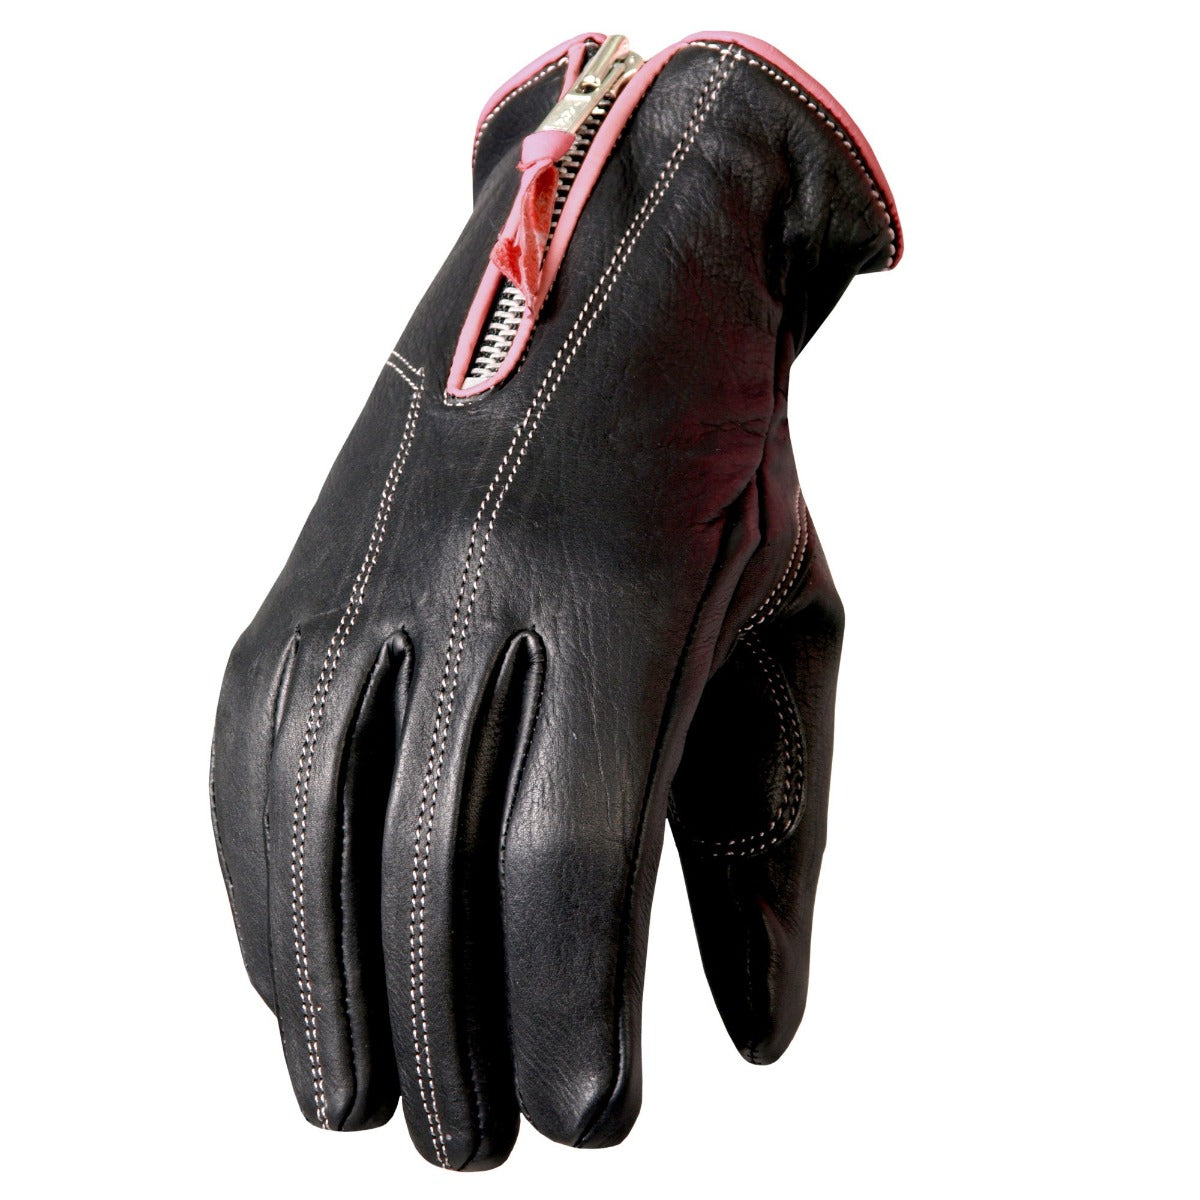 Hot Leathers Women's Driving Gloves W/Pink Piping